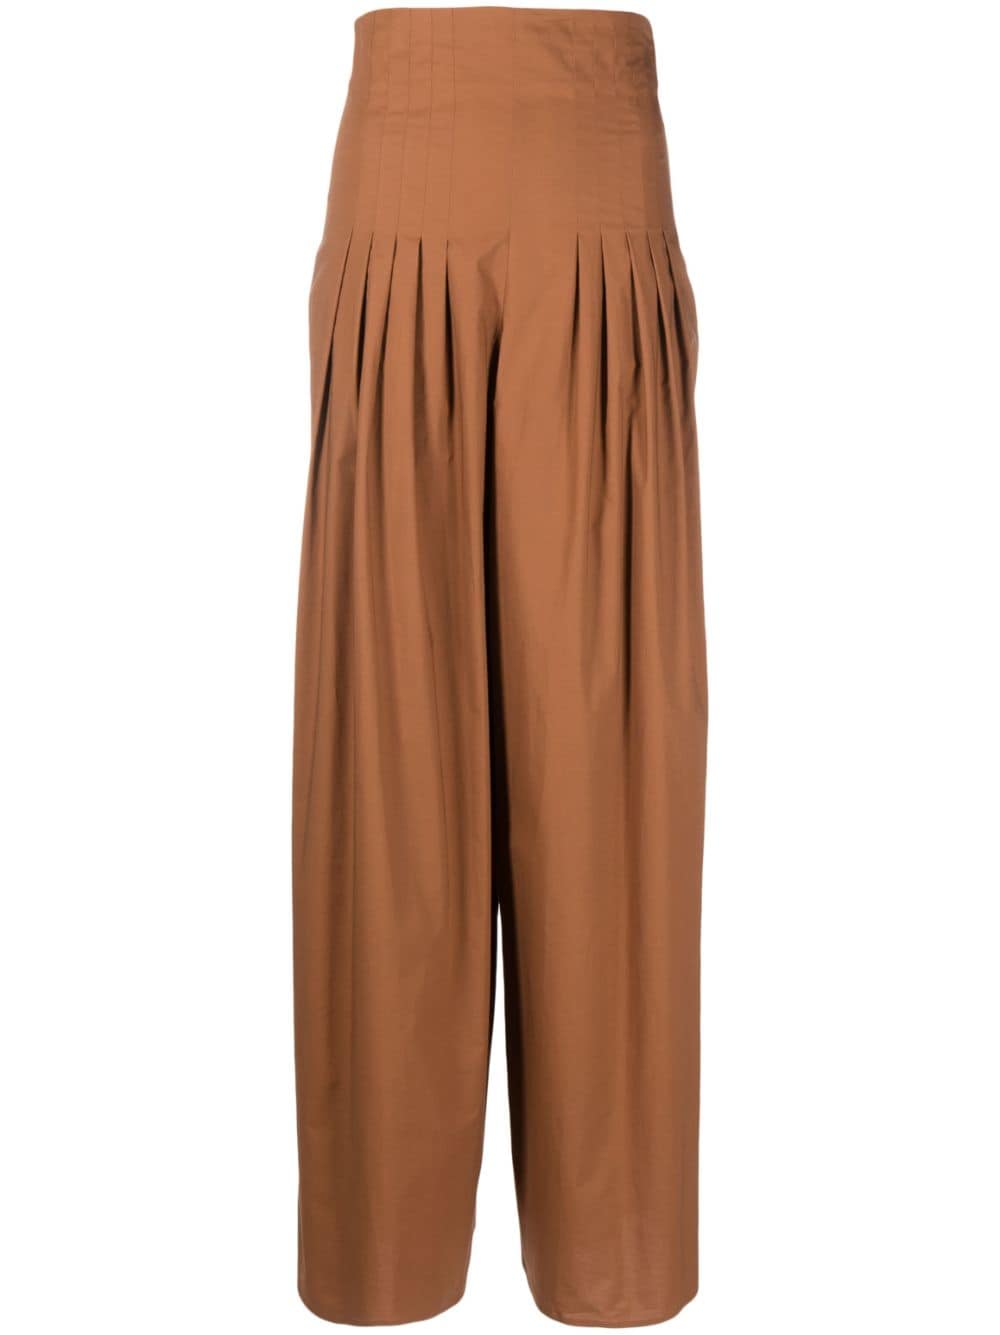 Federica Tosi high-waisted palazzo trousers - Brown